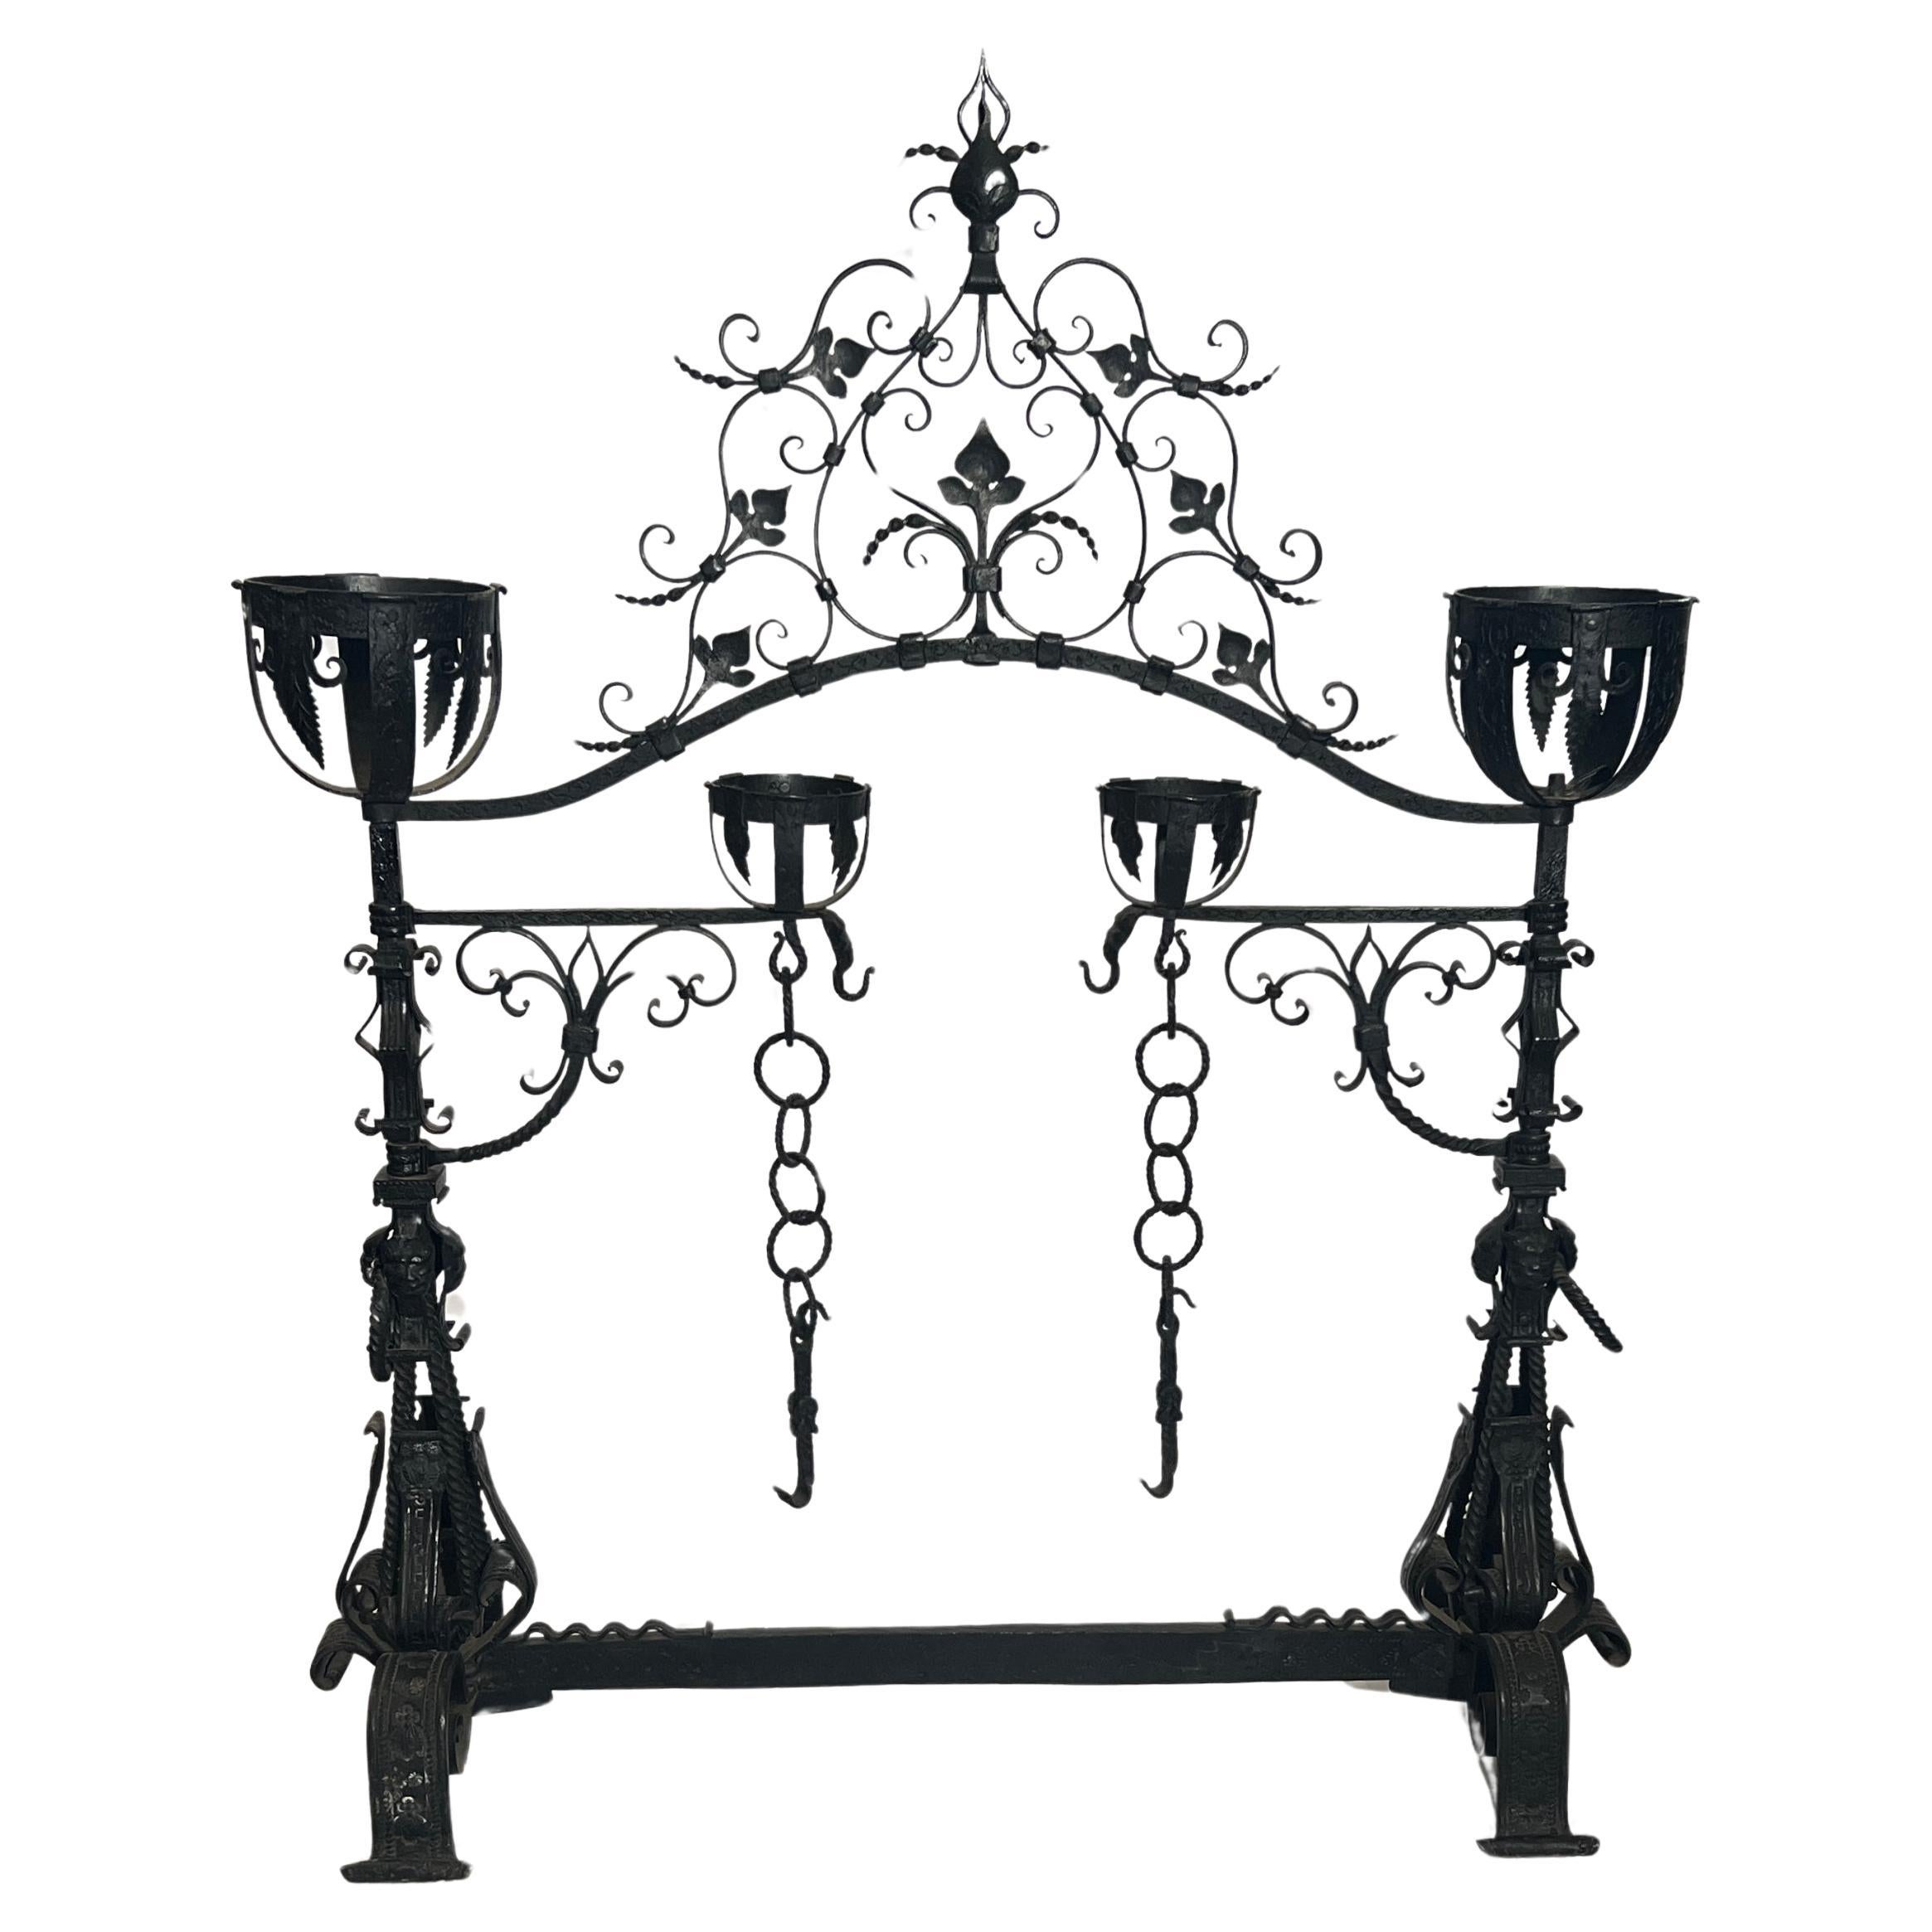 Antique 18th Century French Chateau Wrought Iron Fireplace Surround. 